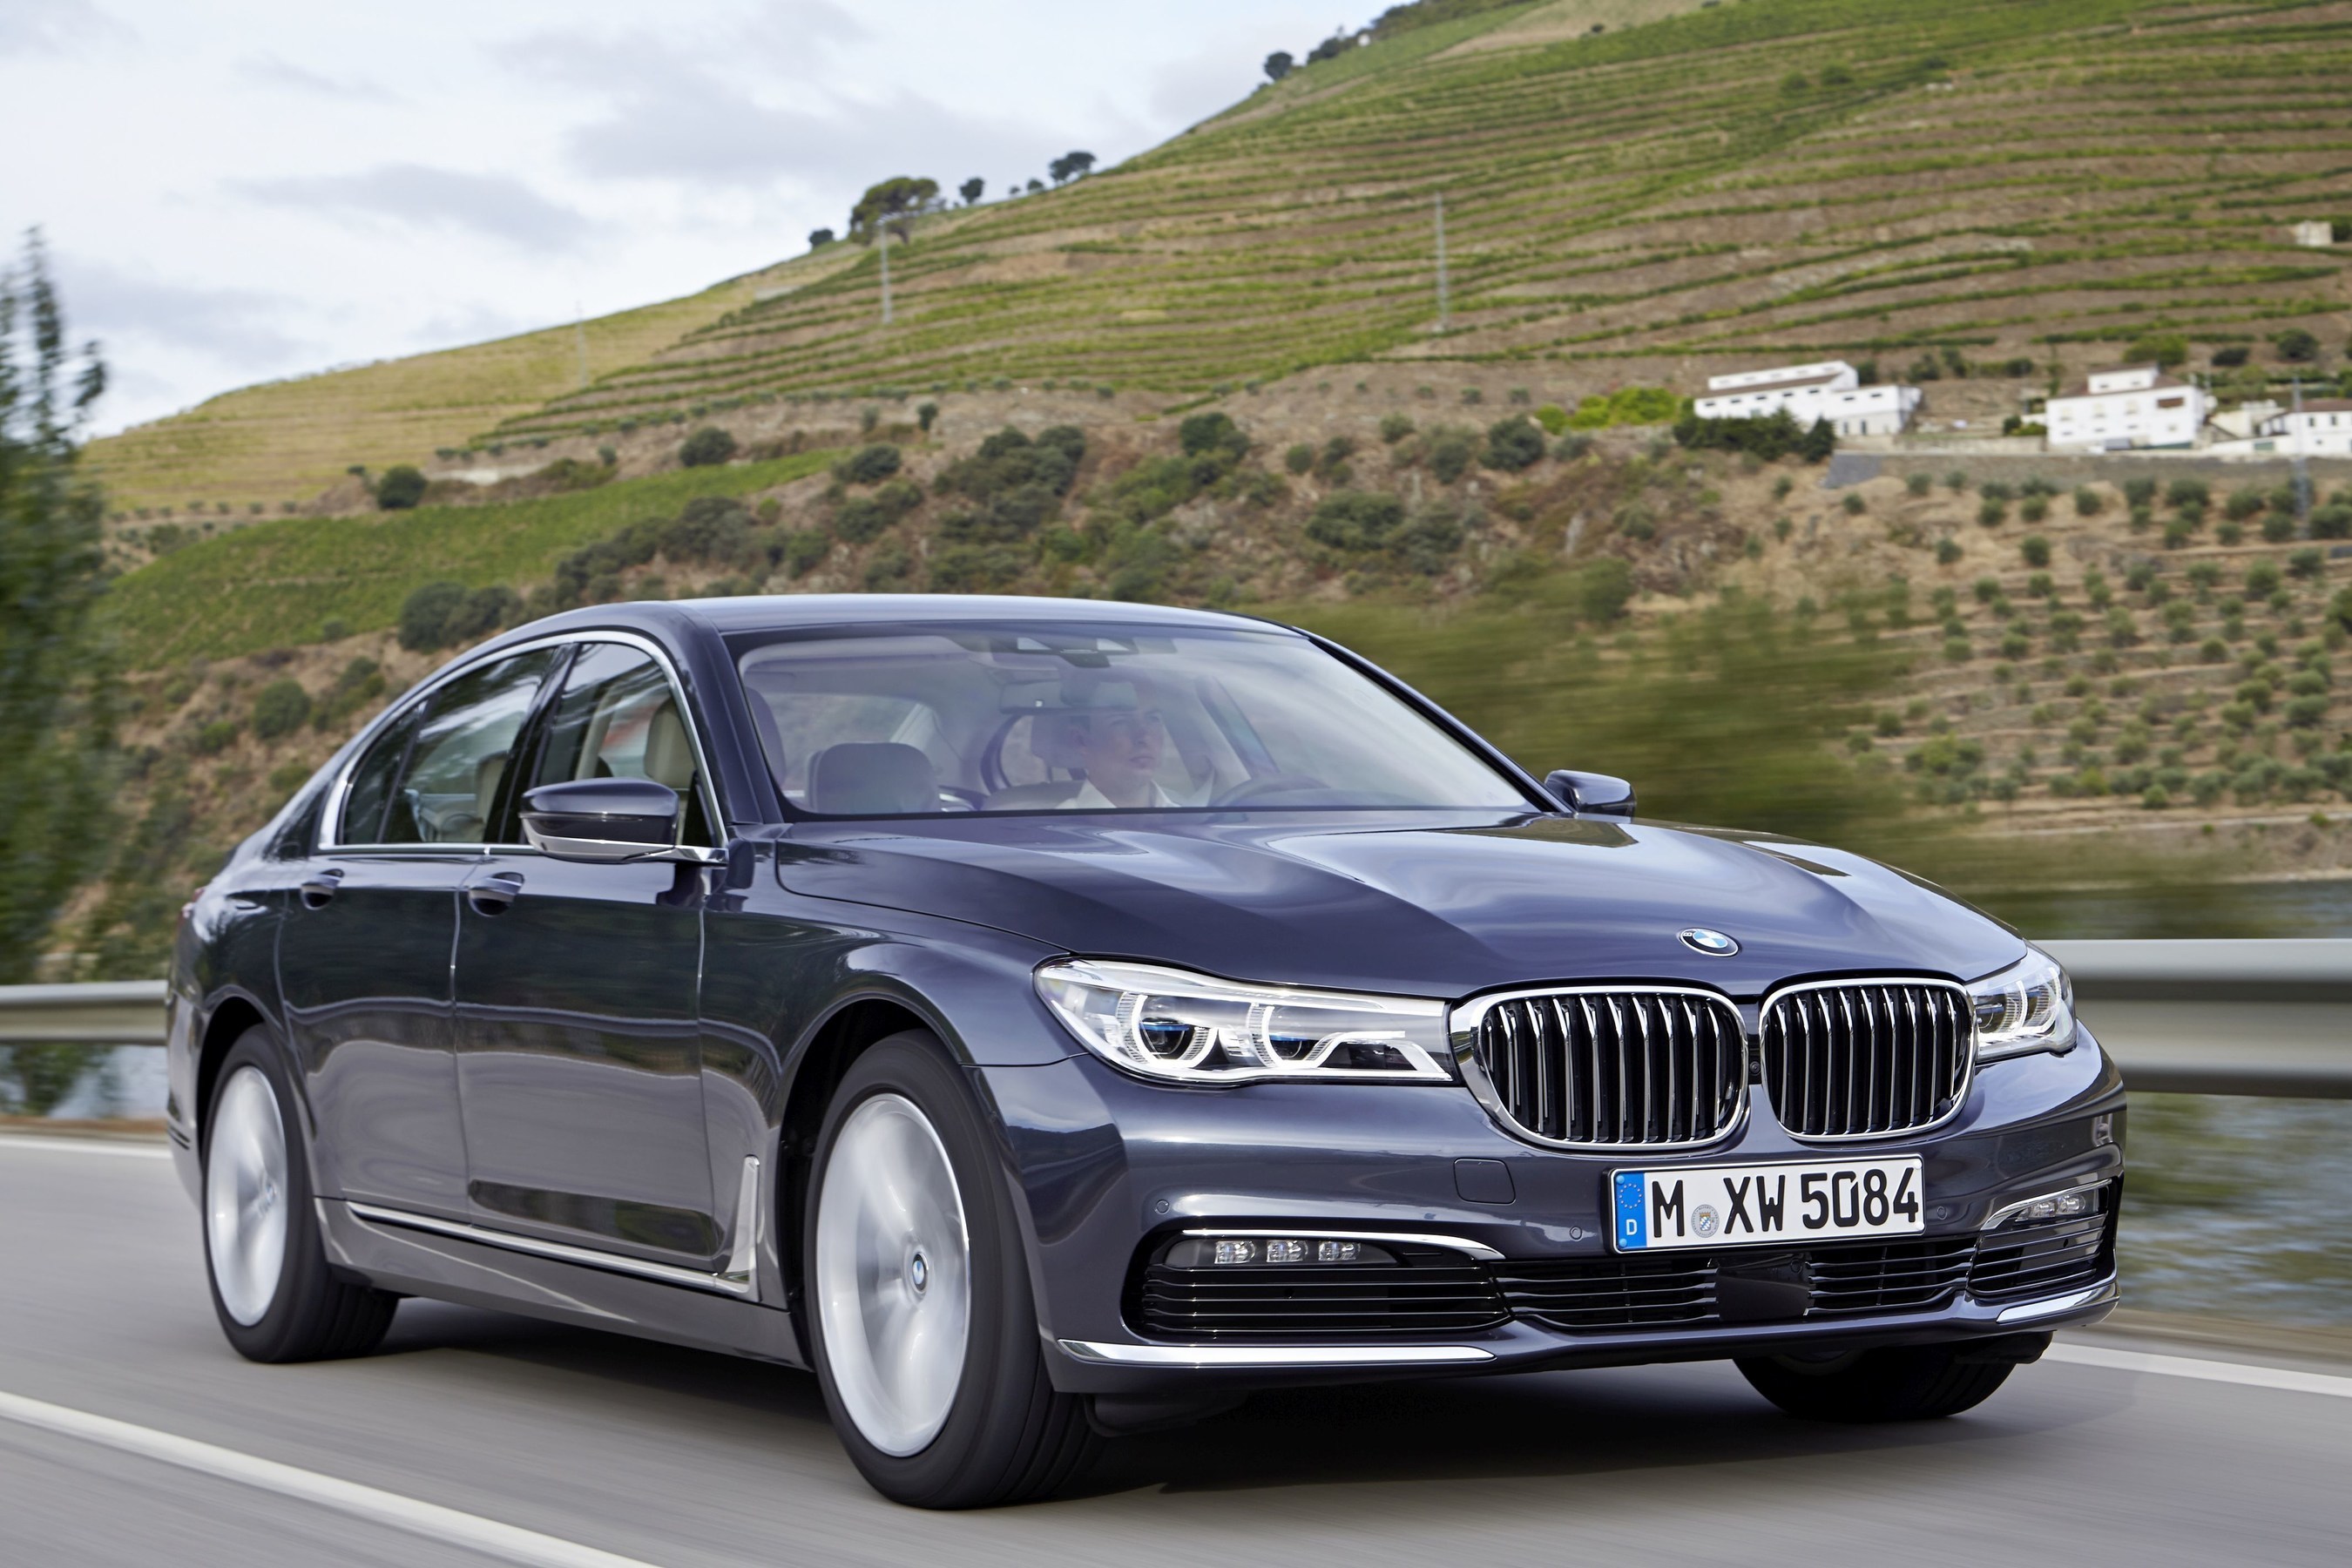 High customer demand for the new BMW 7 Series which has been available since the end of October. (PRNewsFoto/BMW Group) (PRNewsFoto/BMW Group)